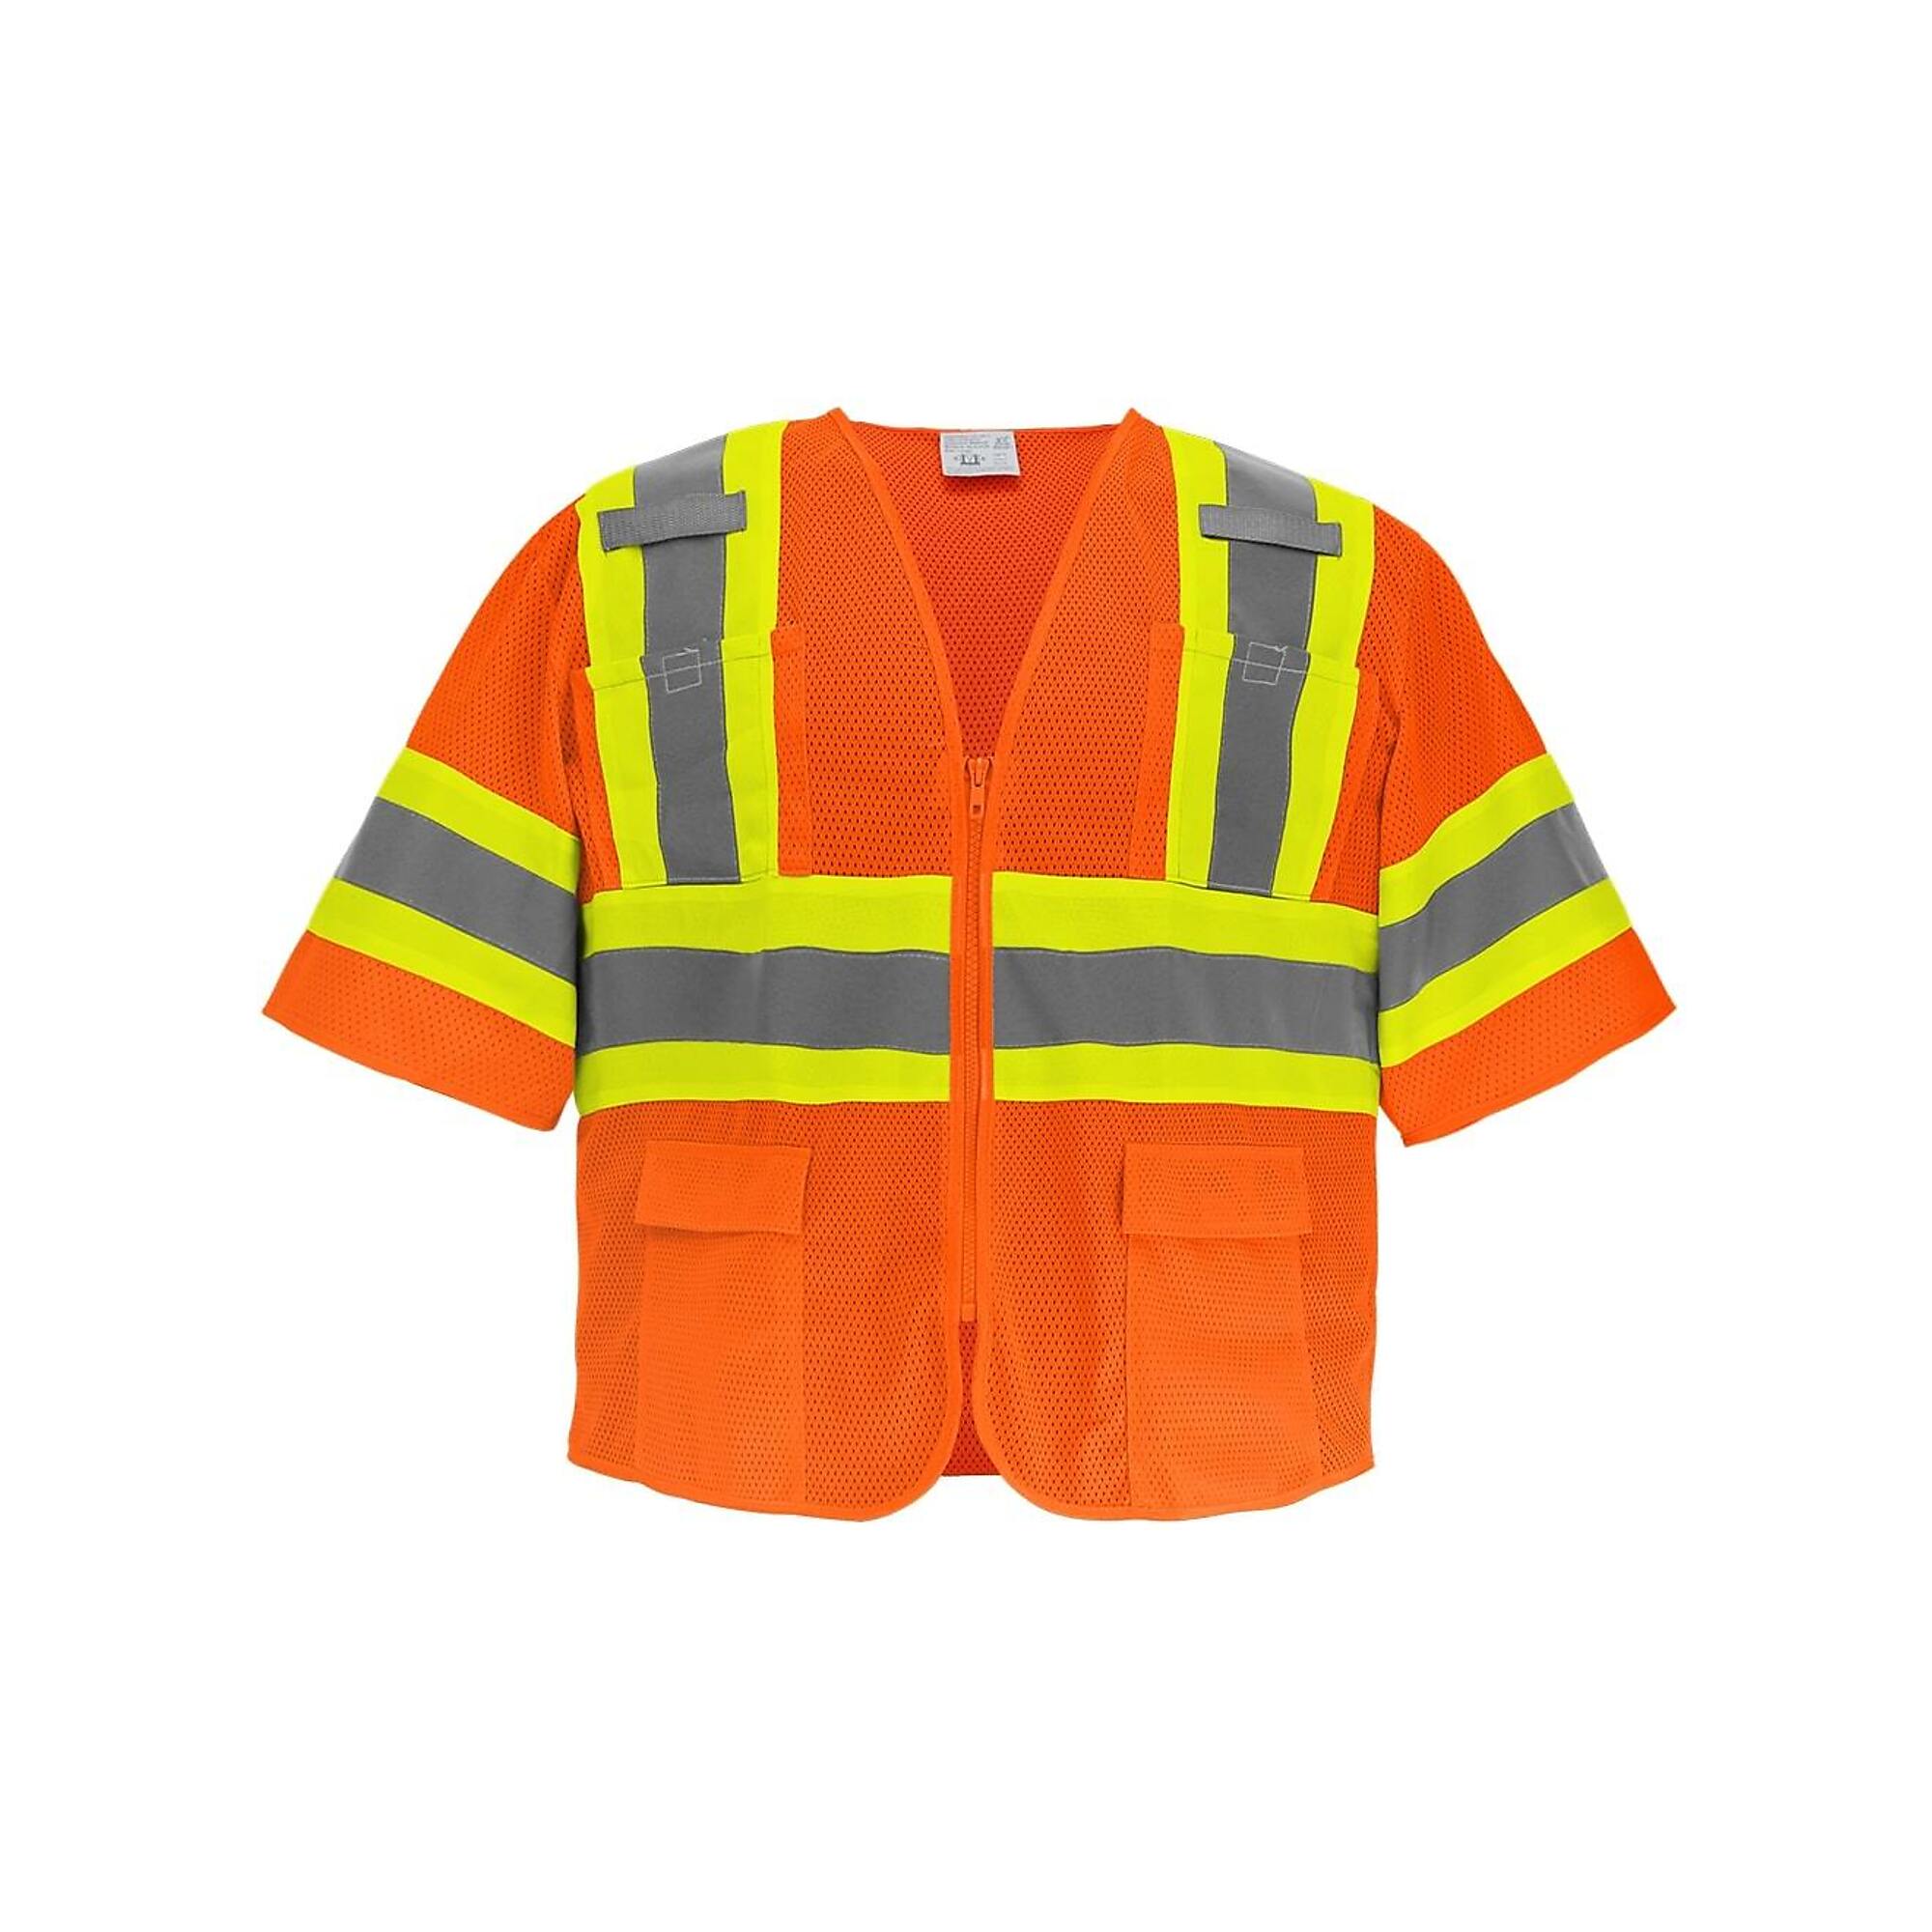 FrogWear, HV Orange, Class 3 6 Pockets, With Sleeves Mesh Vest, Size 2XL, Color High-Visibility Orange, Model GLO-0145-2XL